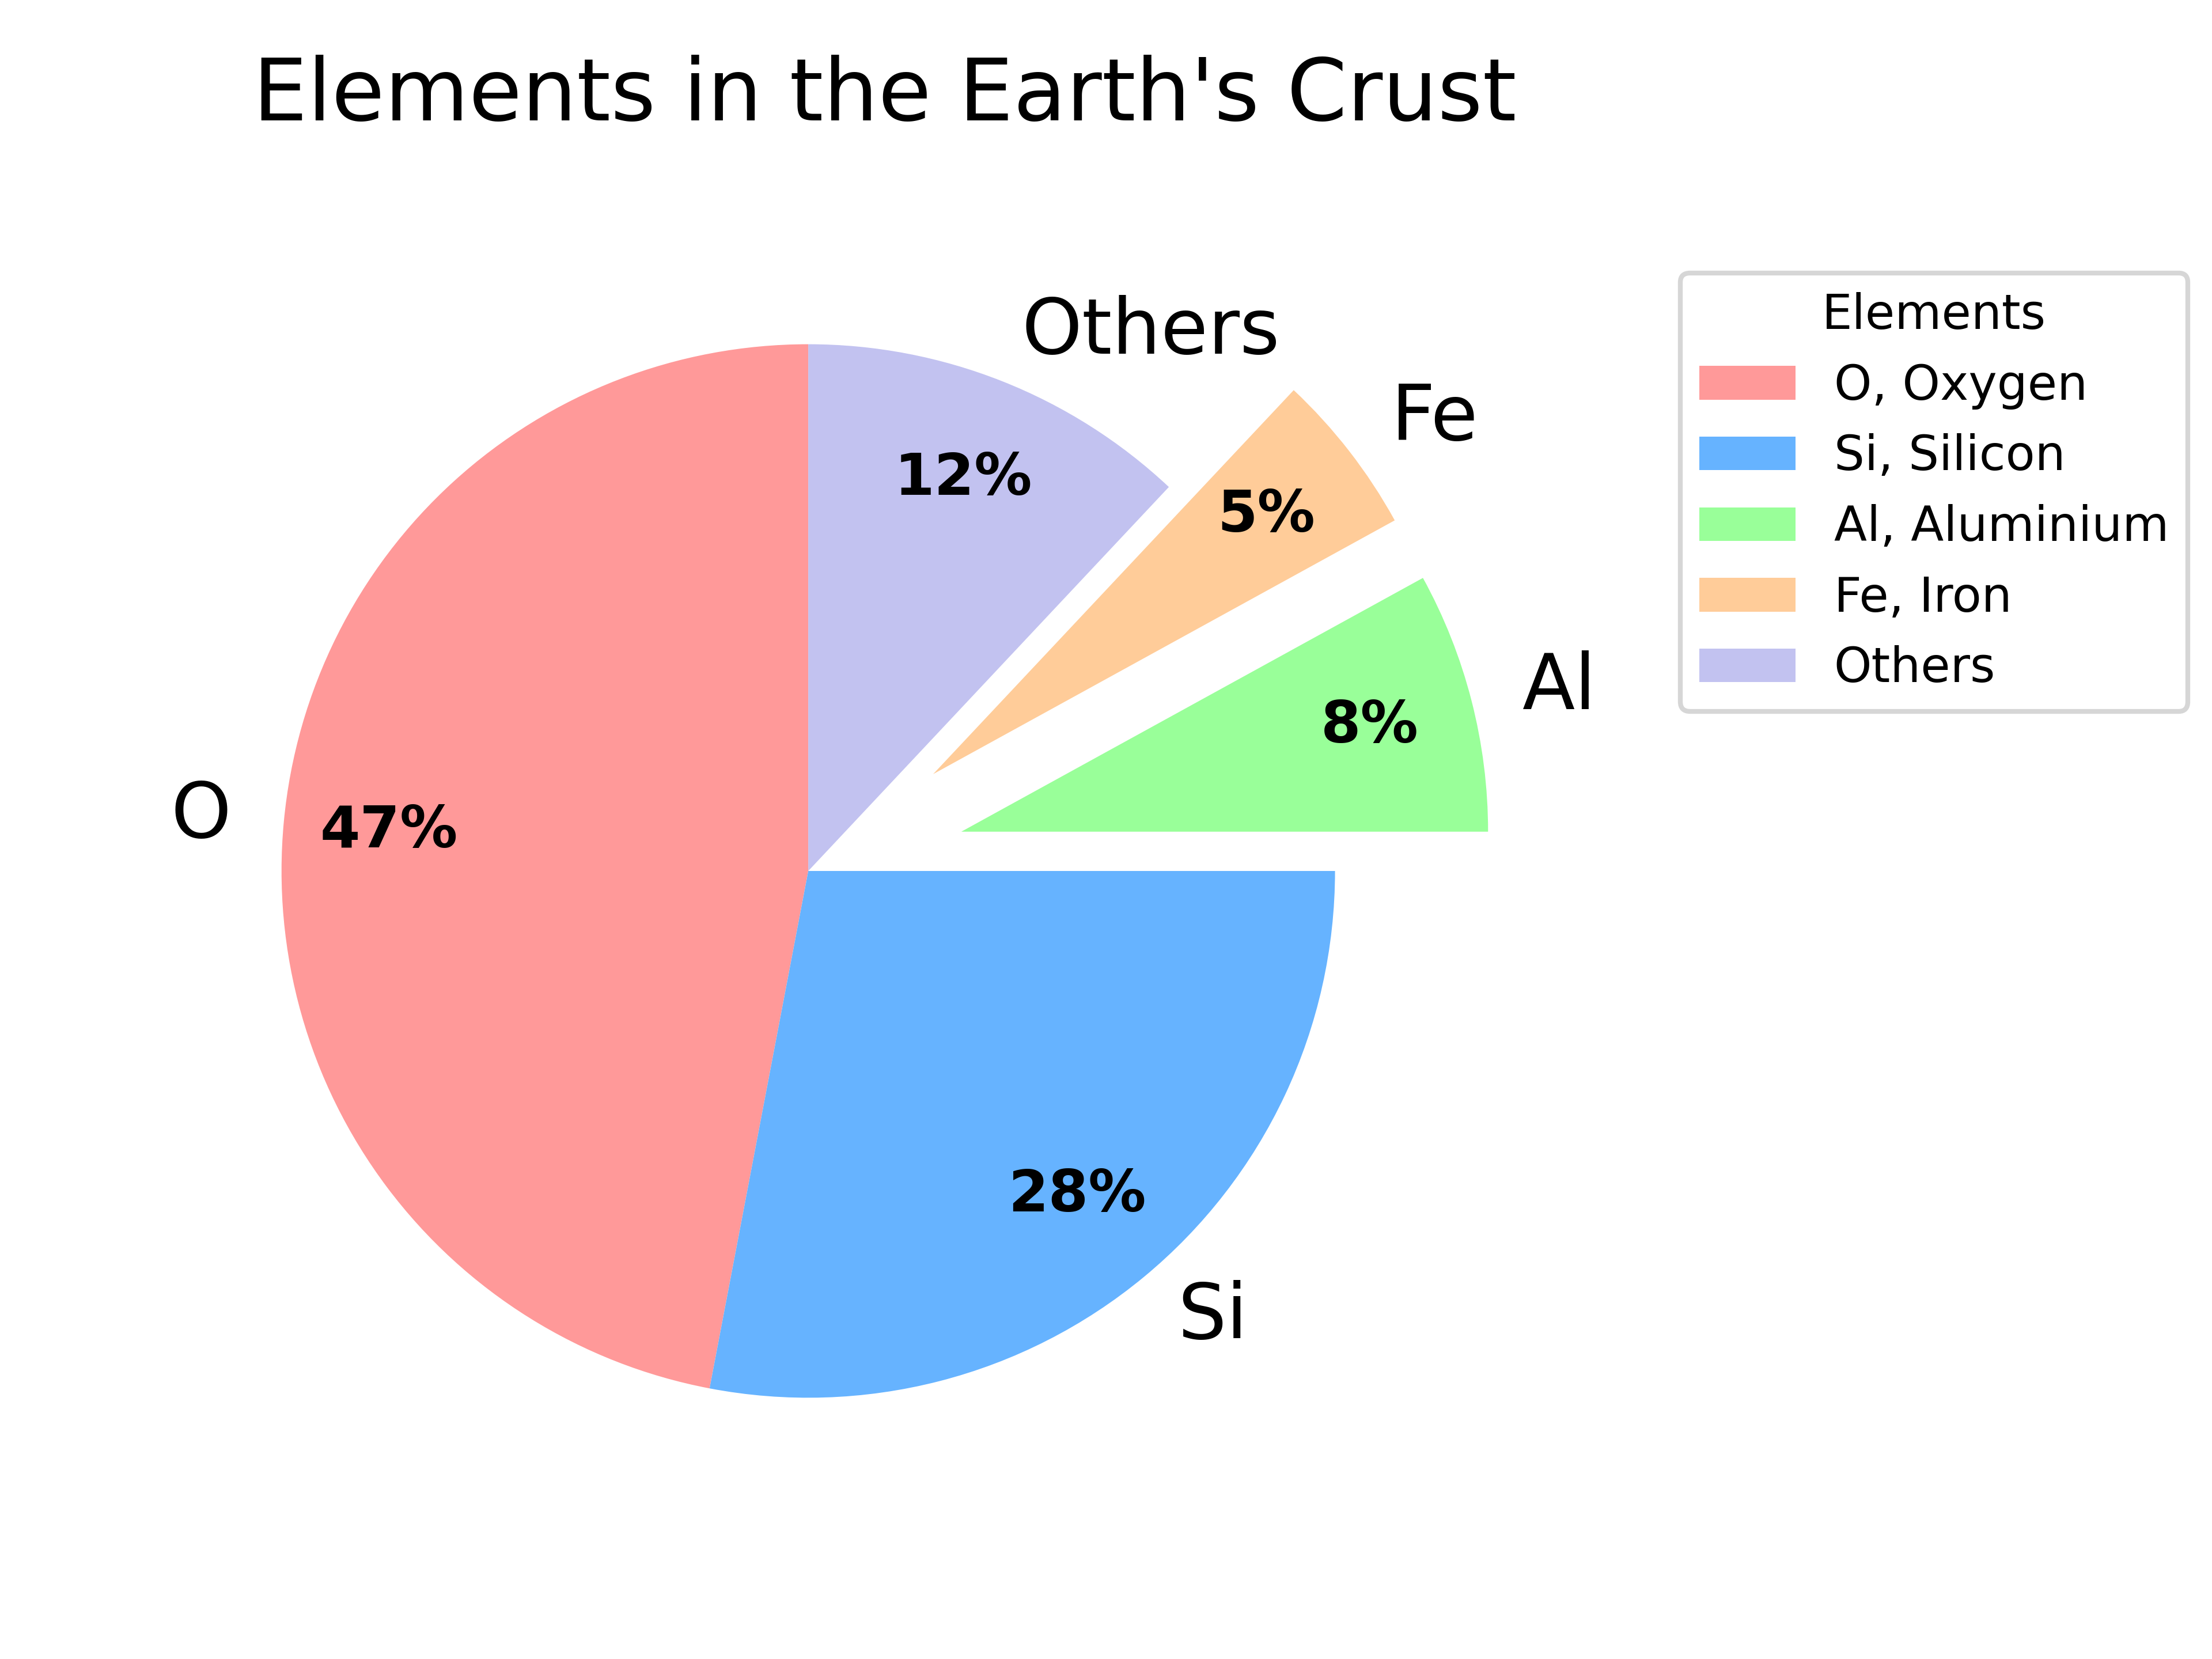 ../_images/Elements_in_the_Earth%27s_Crust.png